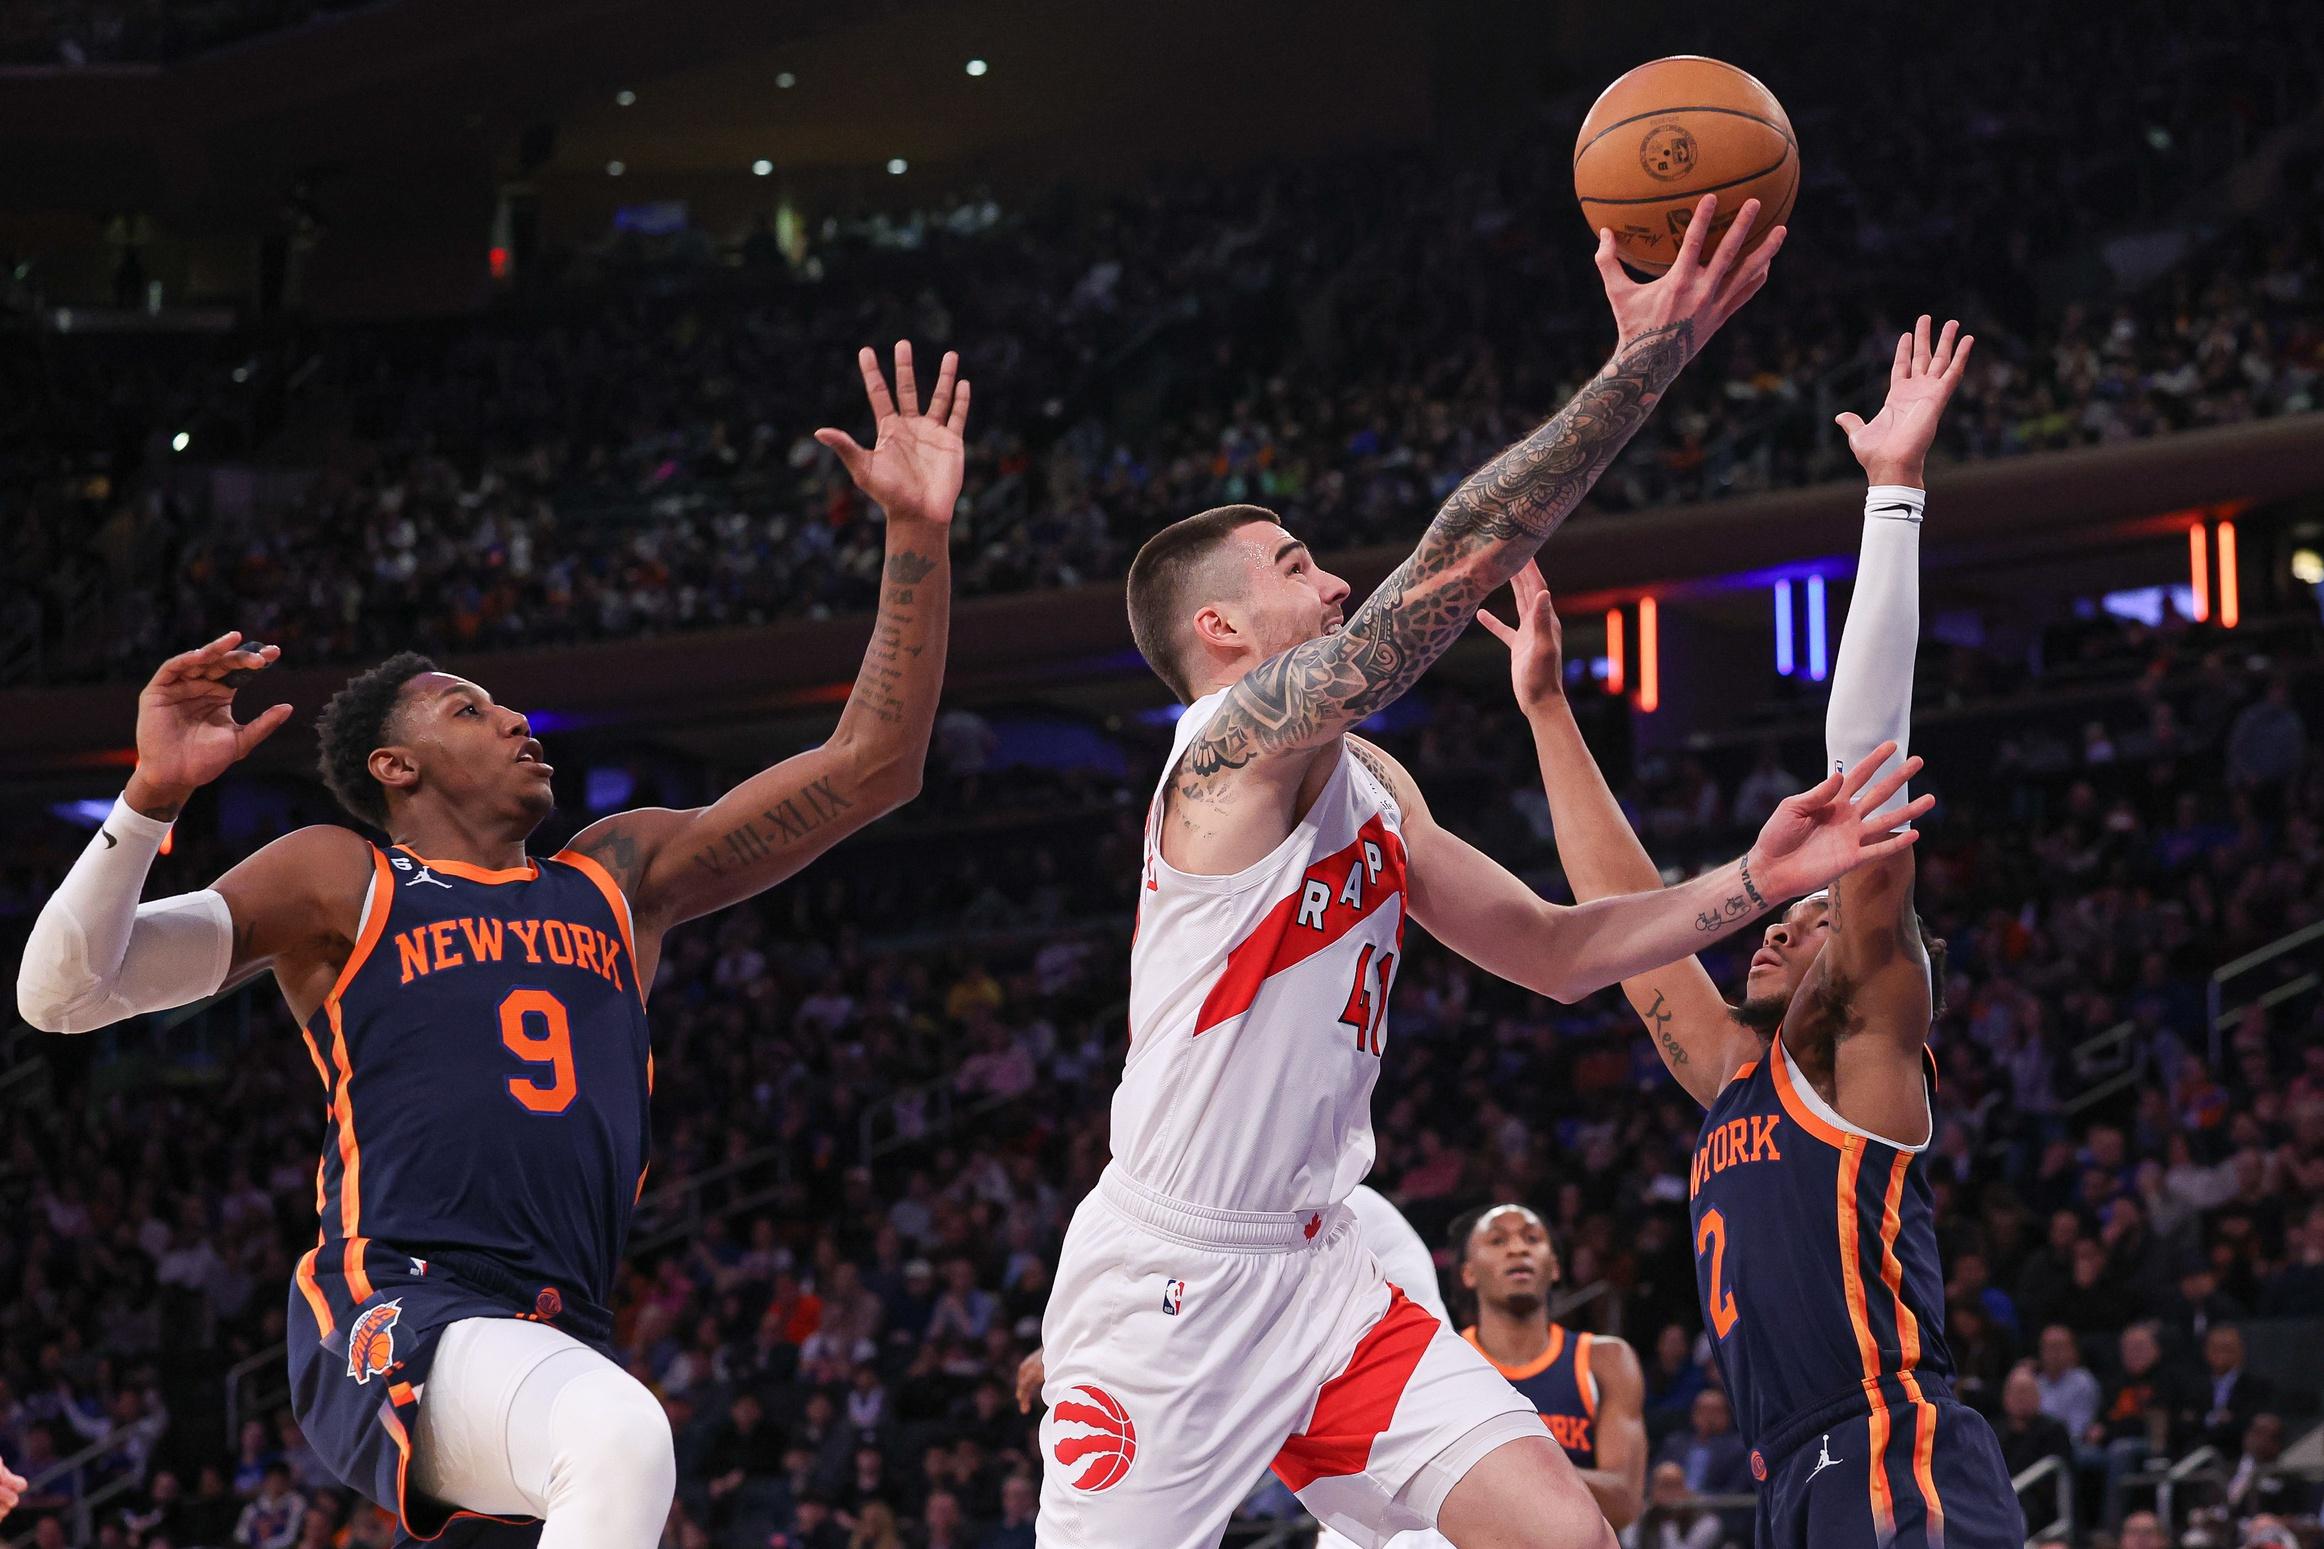 Toronto Raptors forward Juancho Hernangomez (41) drives to the basket as New York Knicks guard RJ Barrett (9) and guard Miles McBride (2) defend during the first half at Madison Square Garden. / Vincent Carchietta-USA TODAY Sports